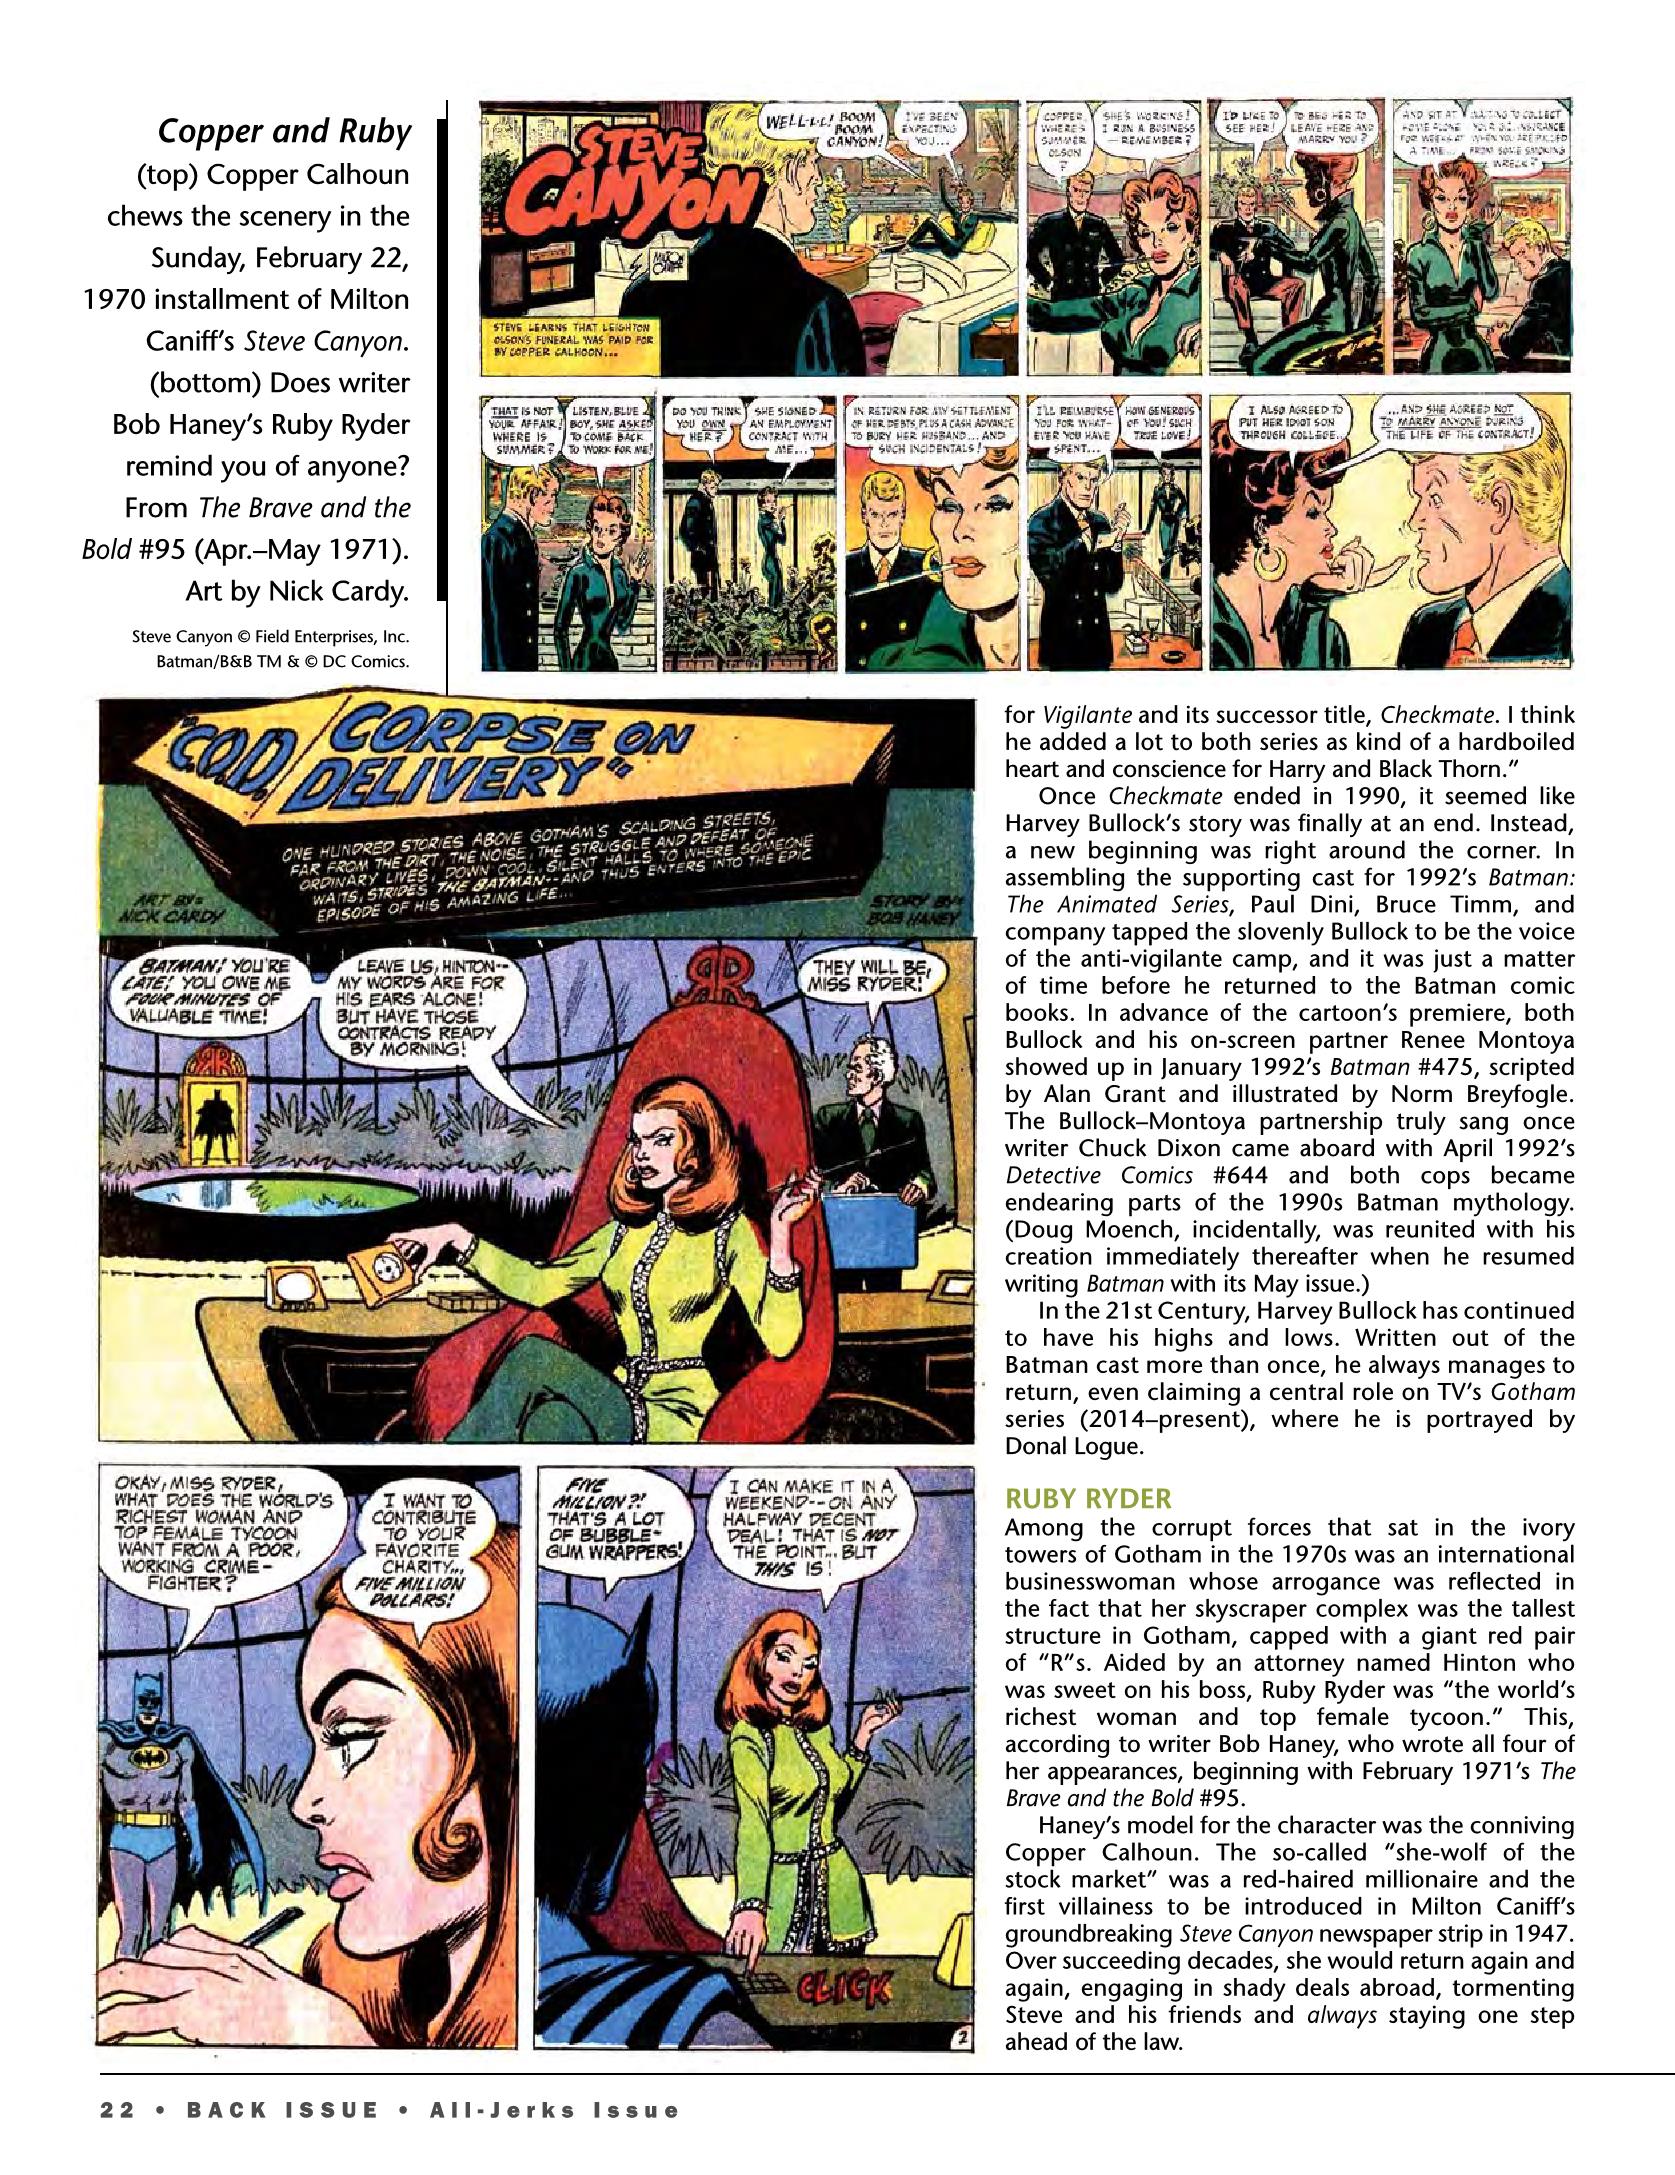 Read online Back Issue comic -  Issue #91 - 17